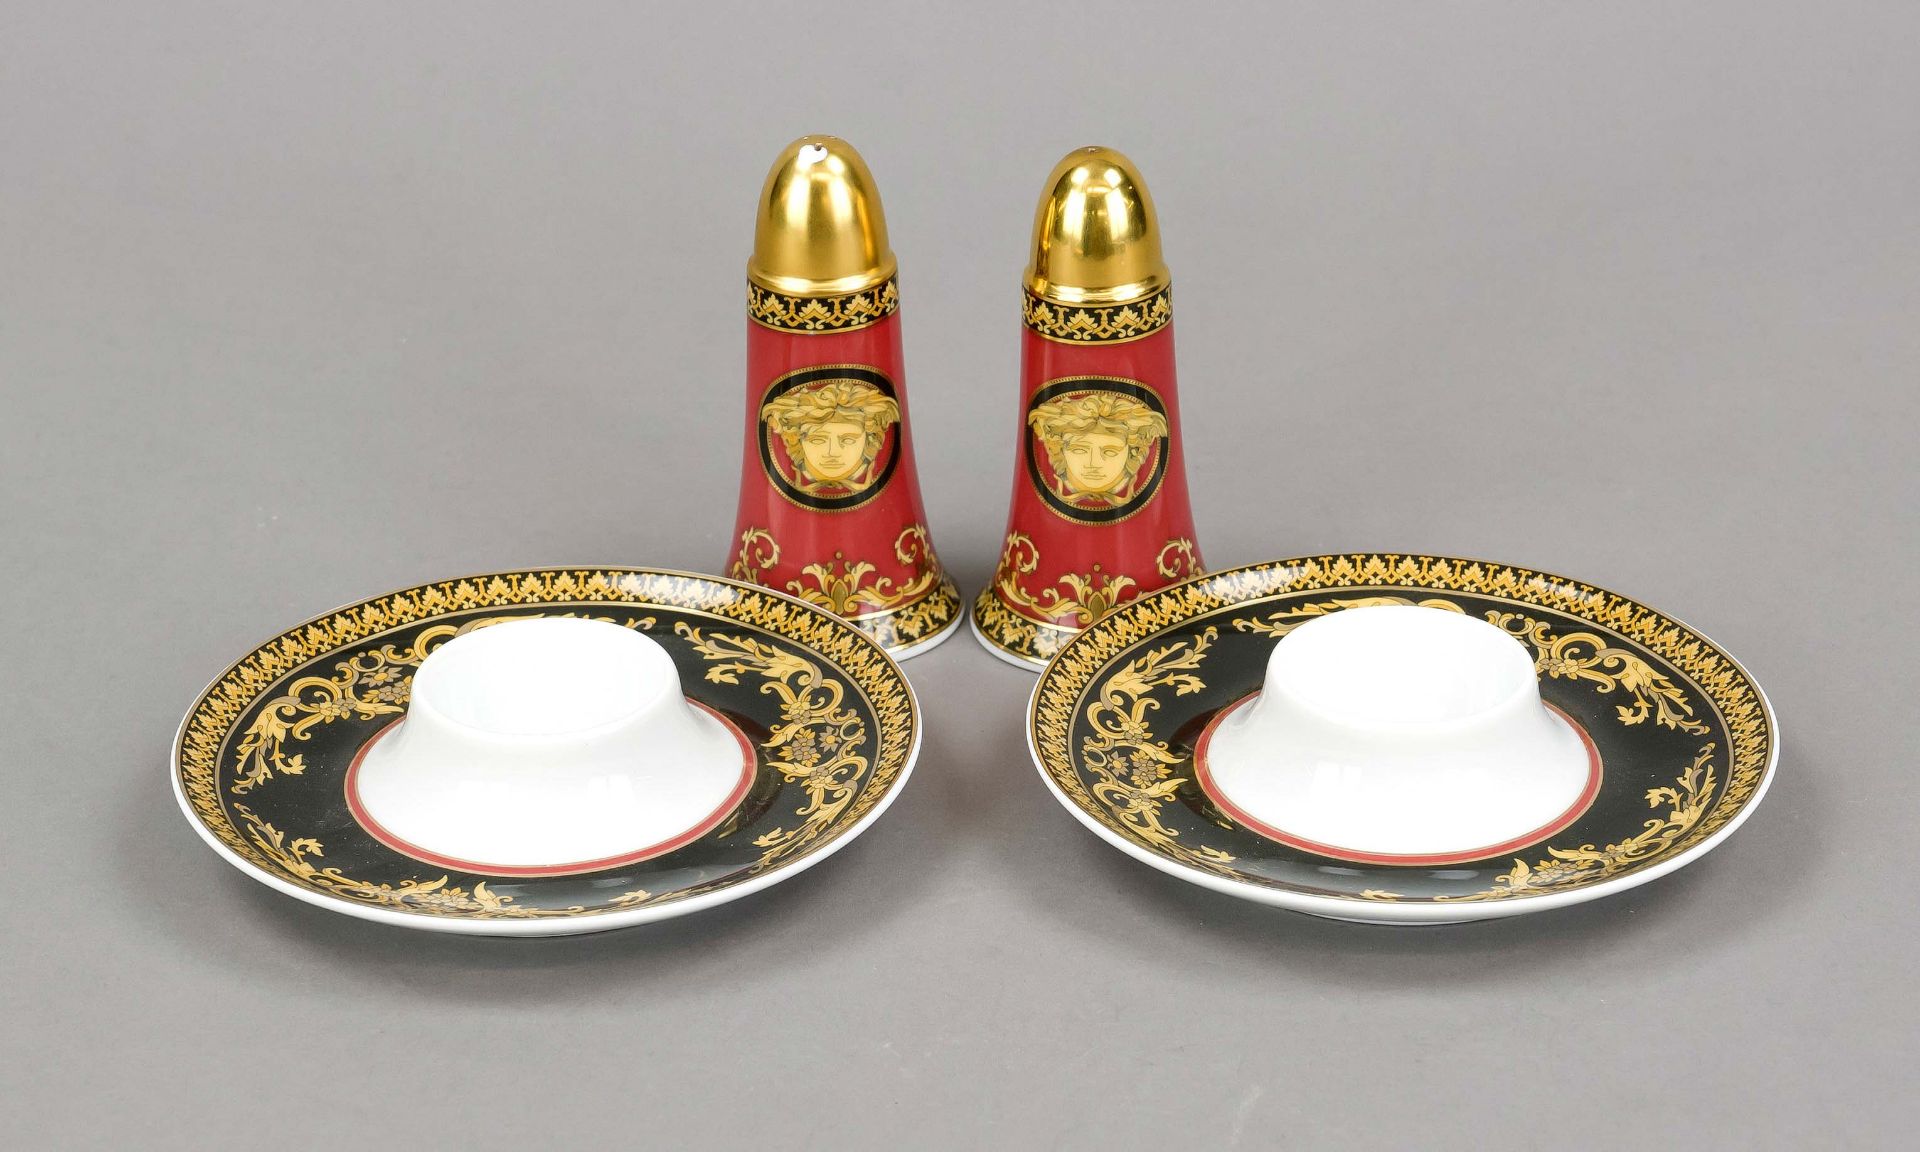 Four pieces, Rosenthal, Versace design for Rosenthal, late 20th century, polychrome decoration,